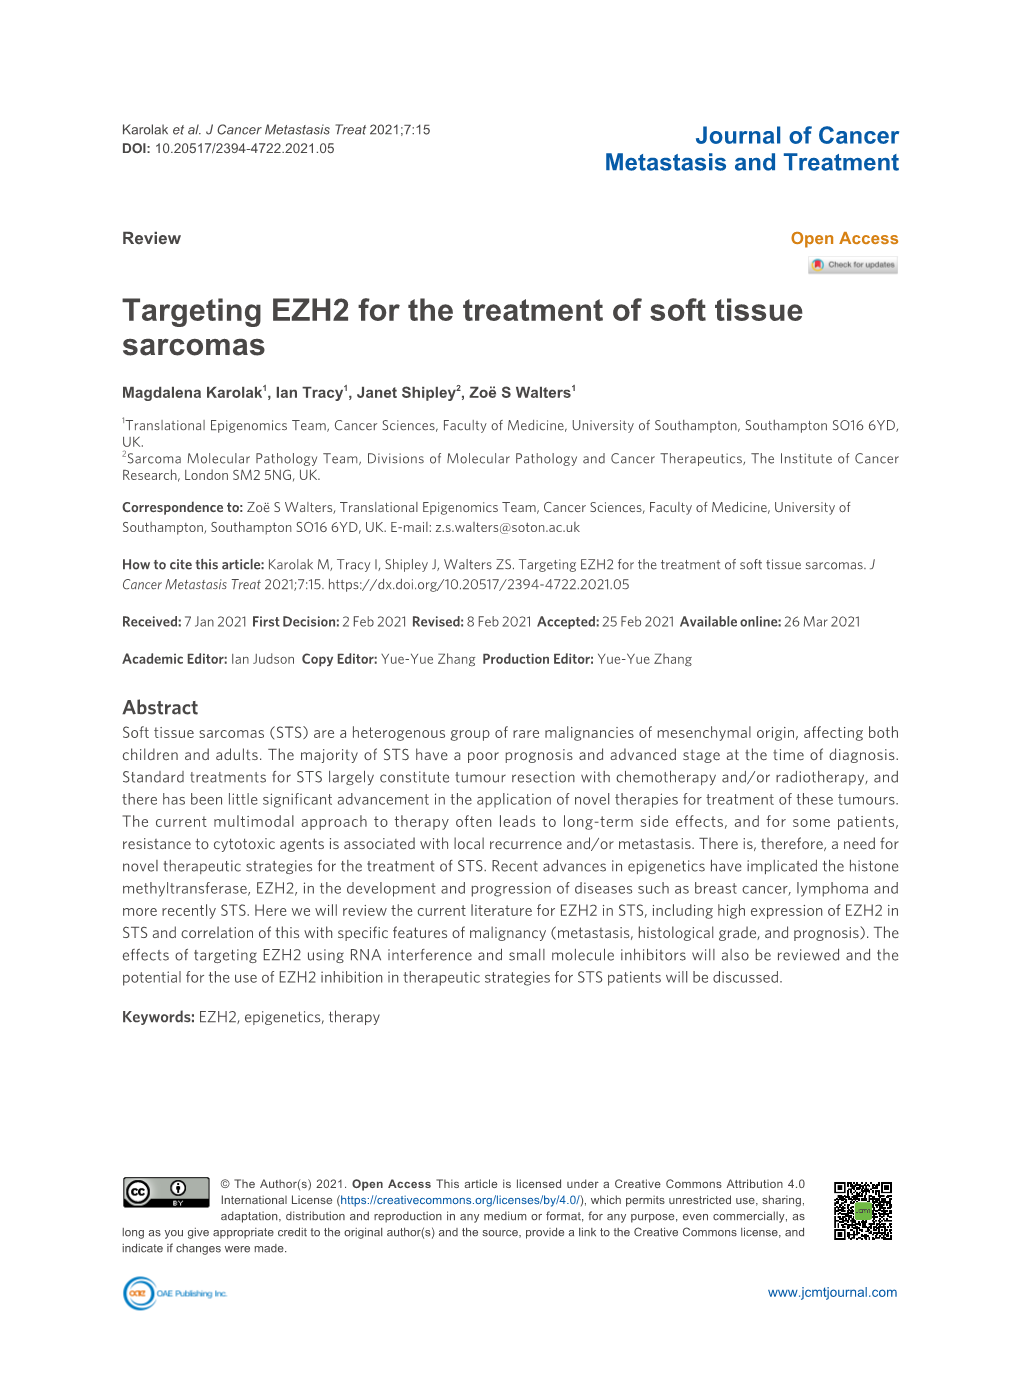 Targeting EZH2 for the Treatment of Soft Tissue Sarcomas